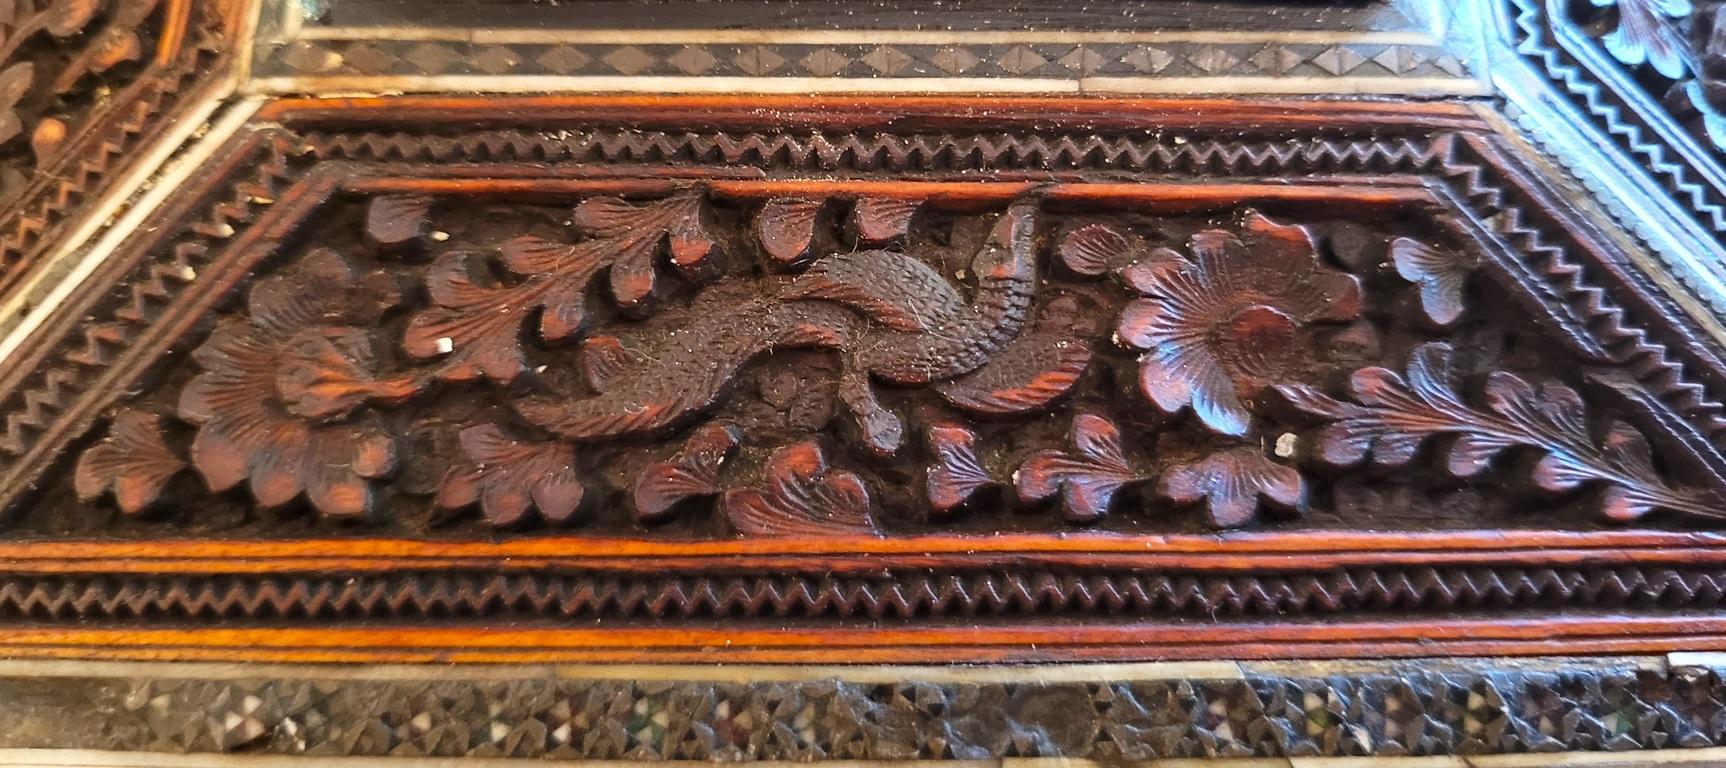 PRESENTING A LOVELY 19C Anglo Indian Highly Carved Padouk Wood with Sadeli Mosaic Inlay Sewing Box.

Made in Bombay, India, circa 1880.

The box is made of sandalwood with highly carved raised padouk wood panels on all sides, depicting temple